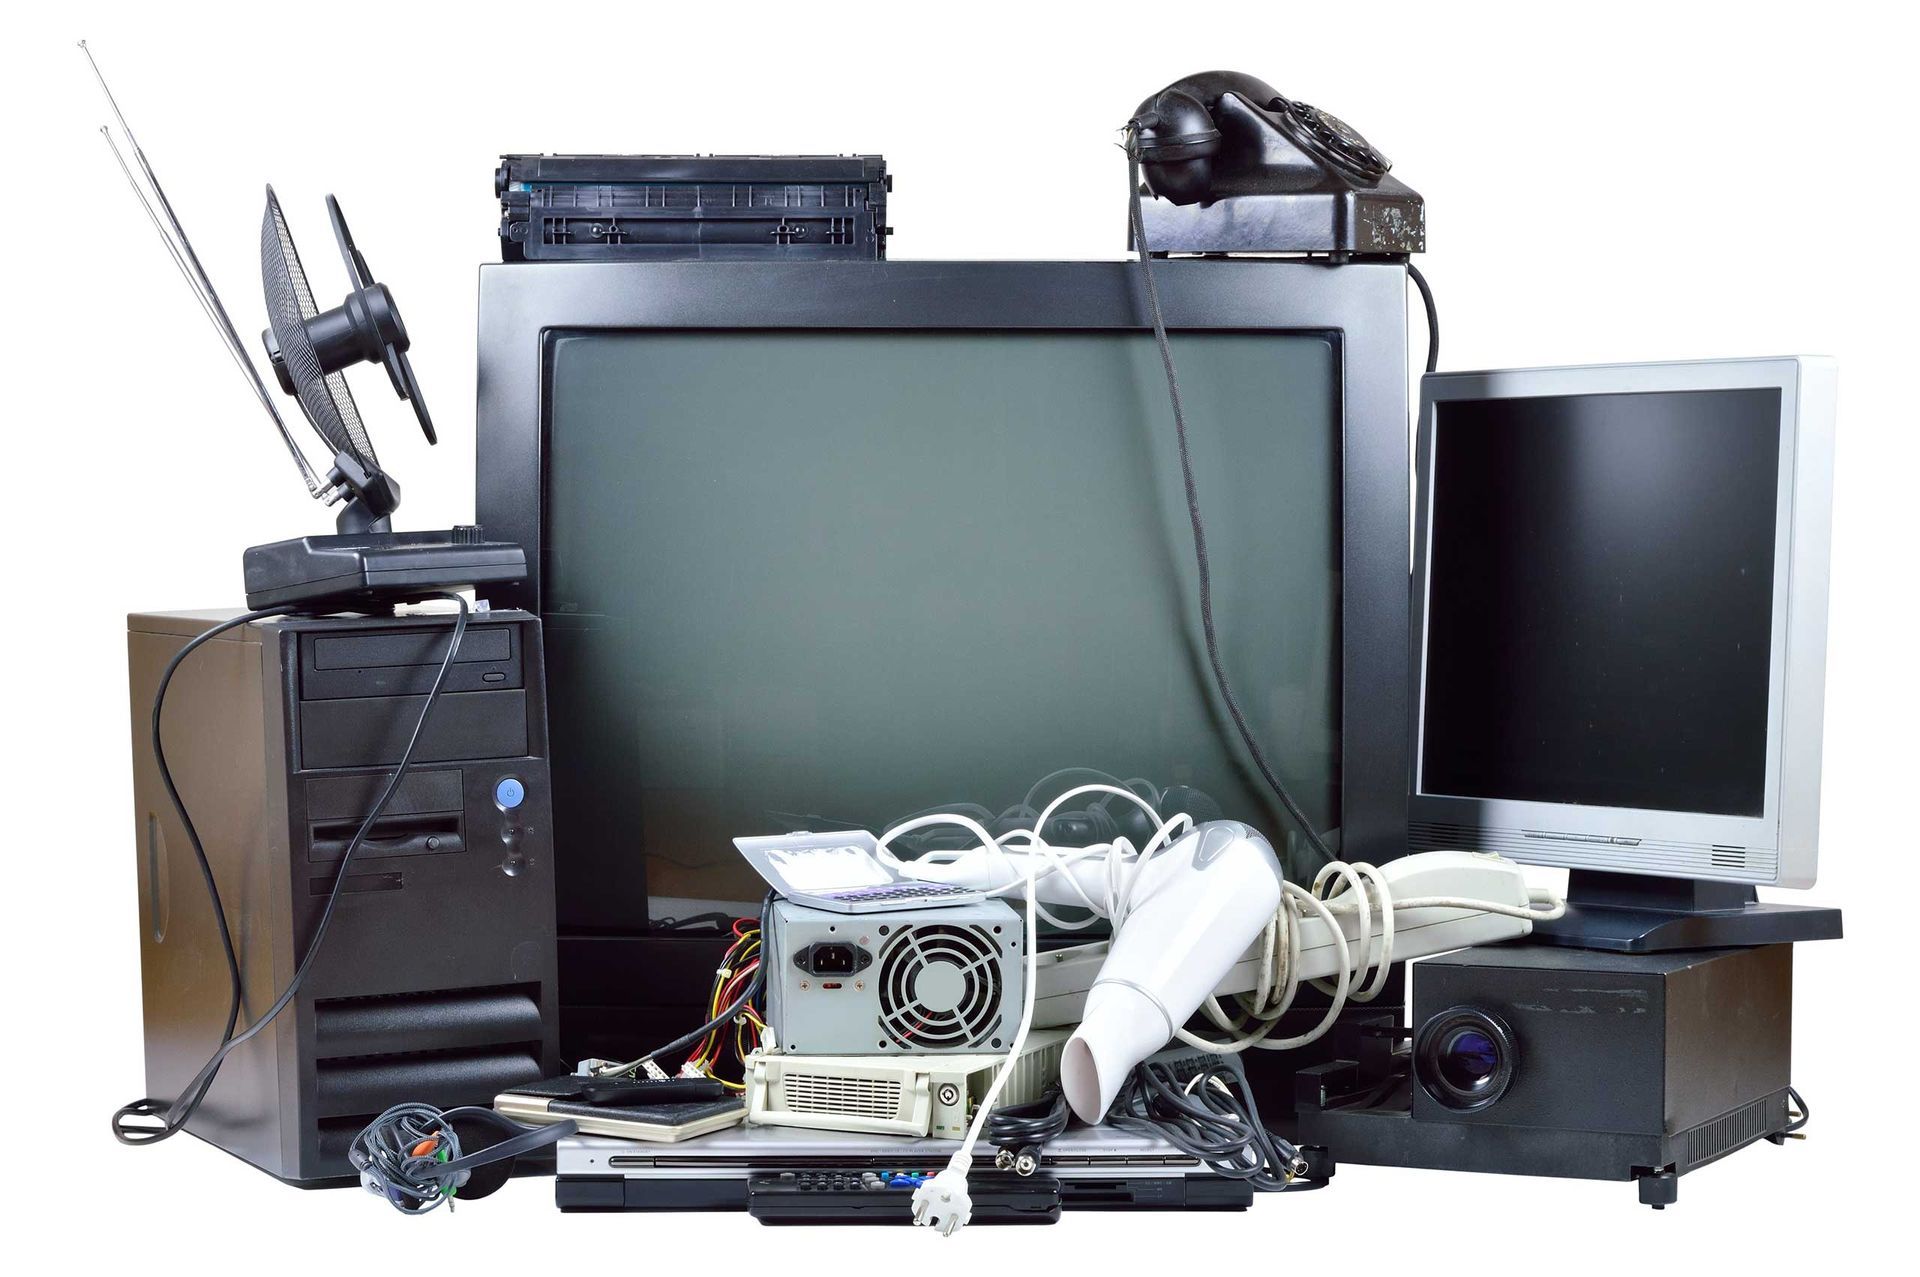 Computer and Electronics Recycling in Massachusetts